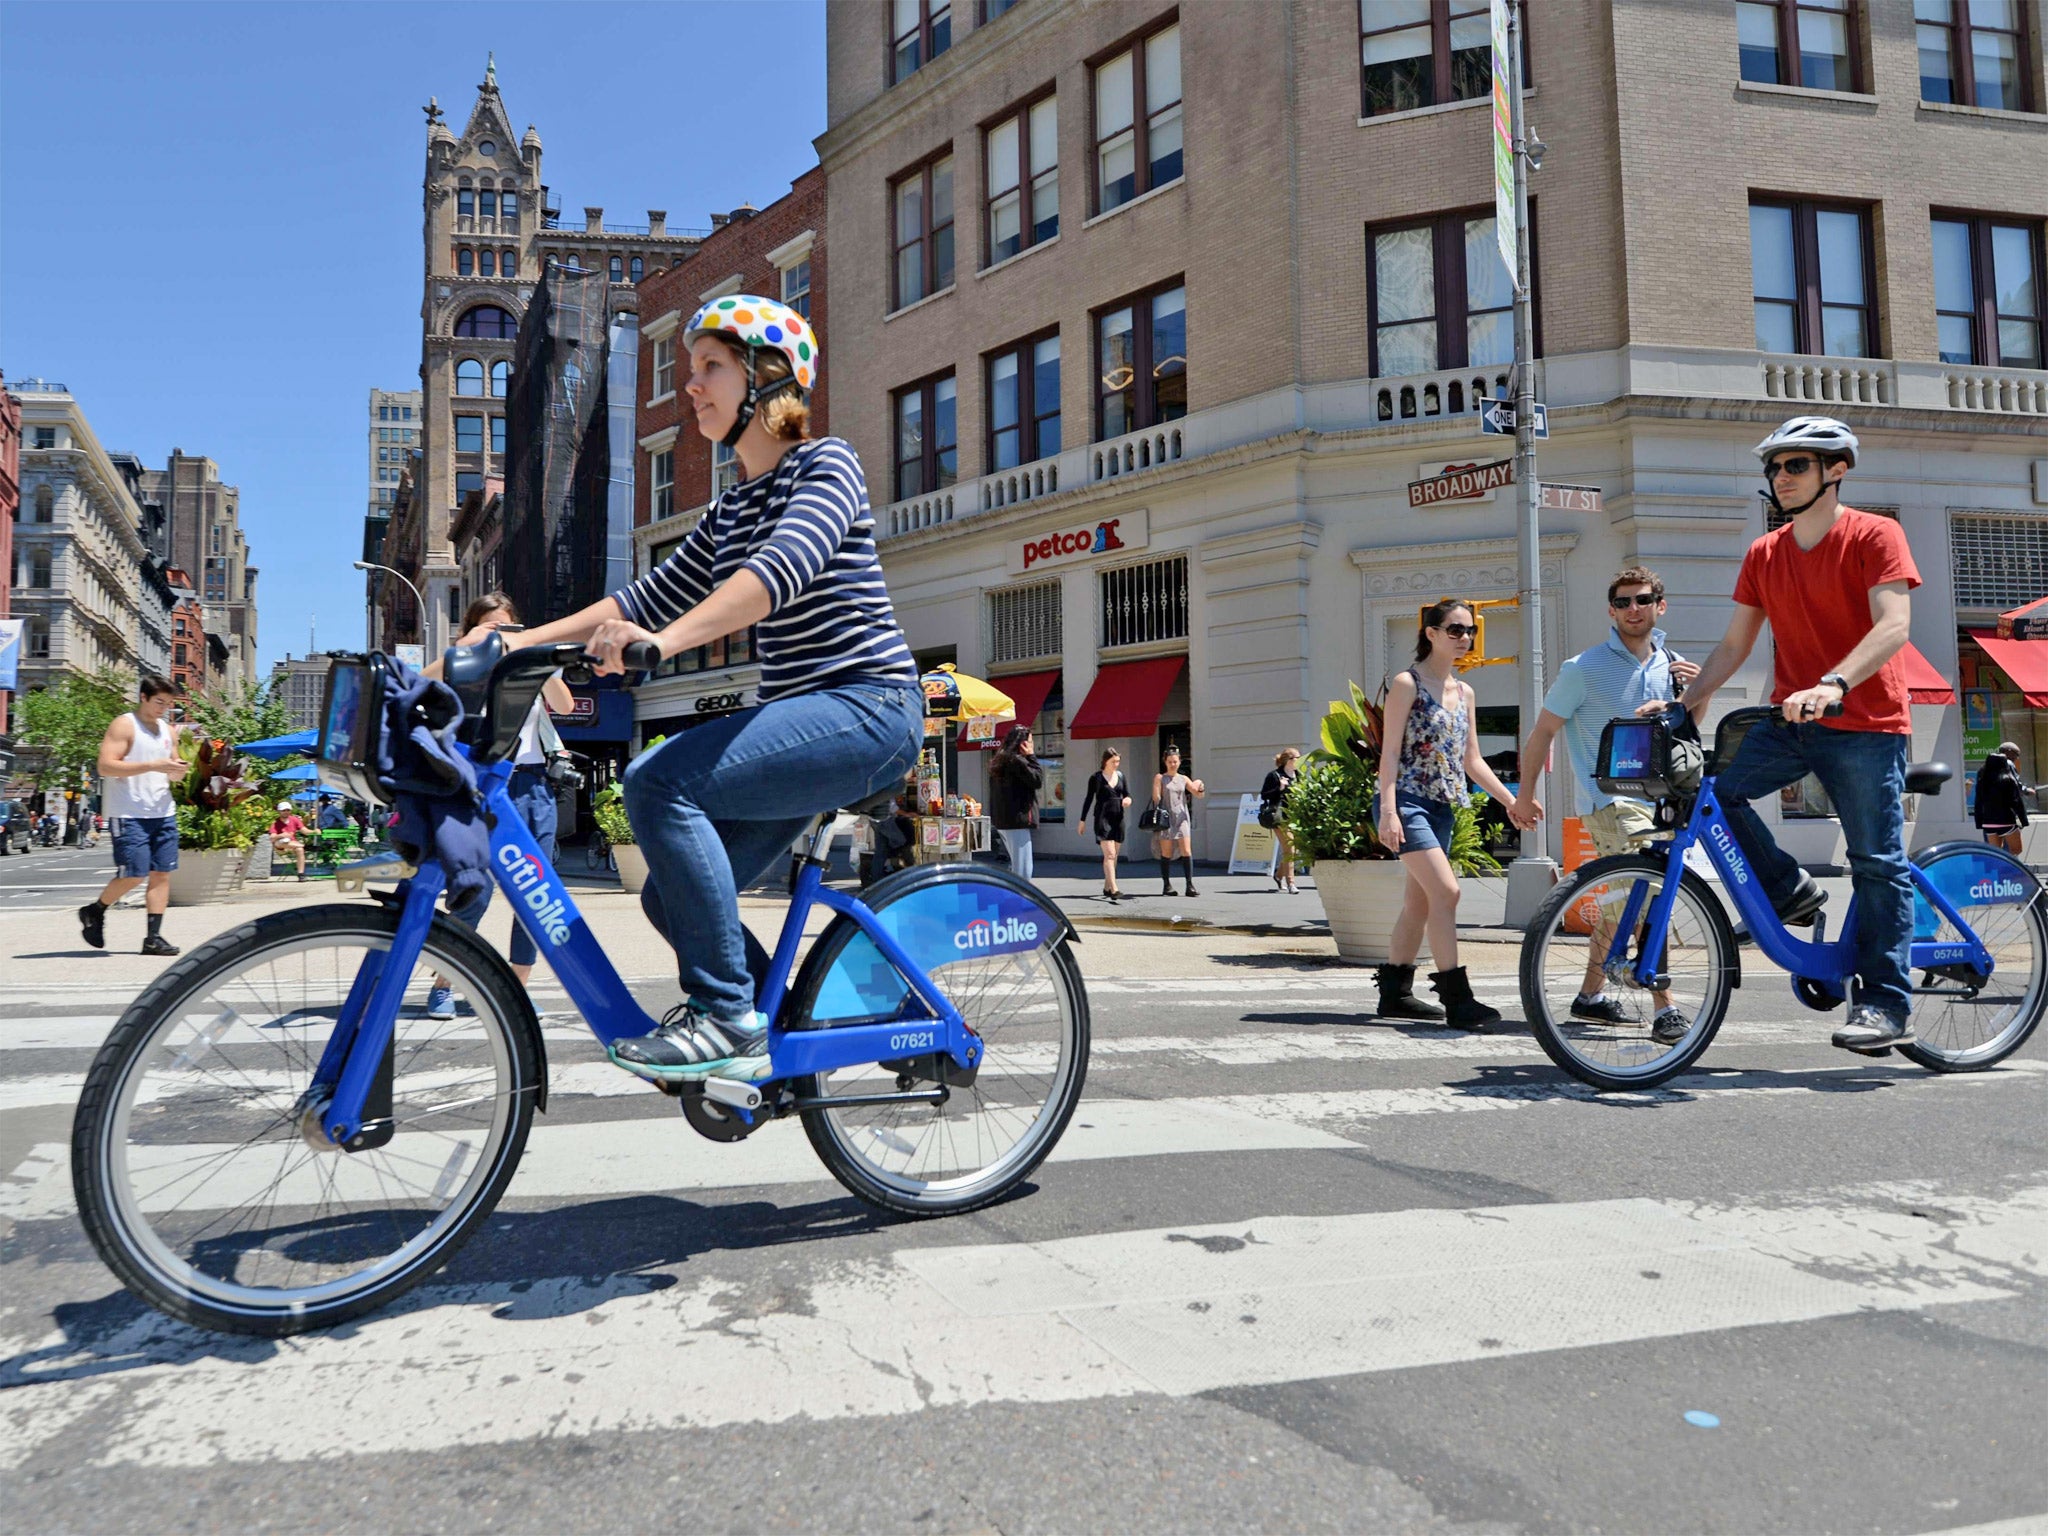 New Yorkers have embraced the Citi Bikes